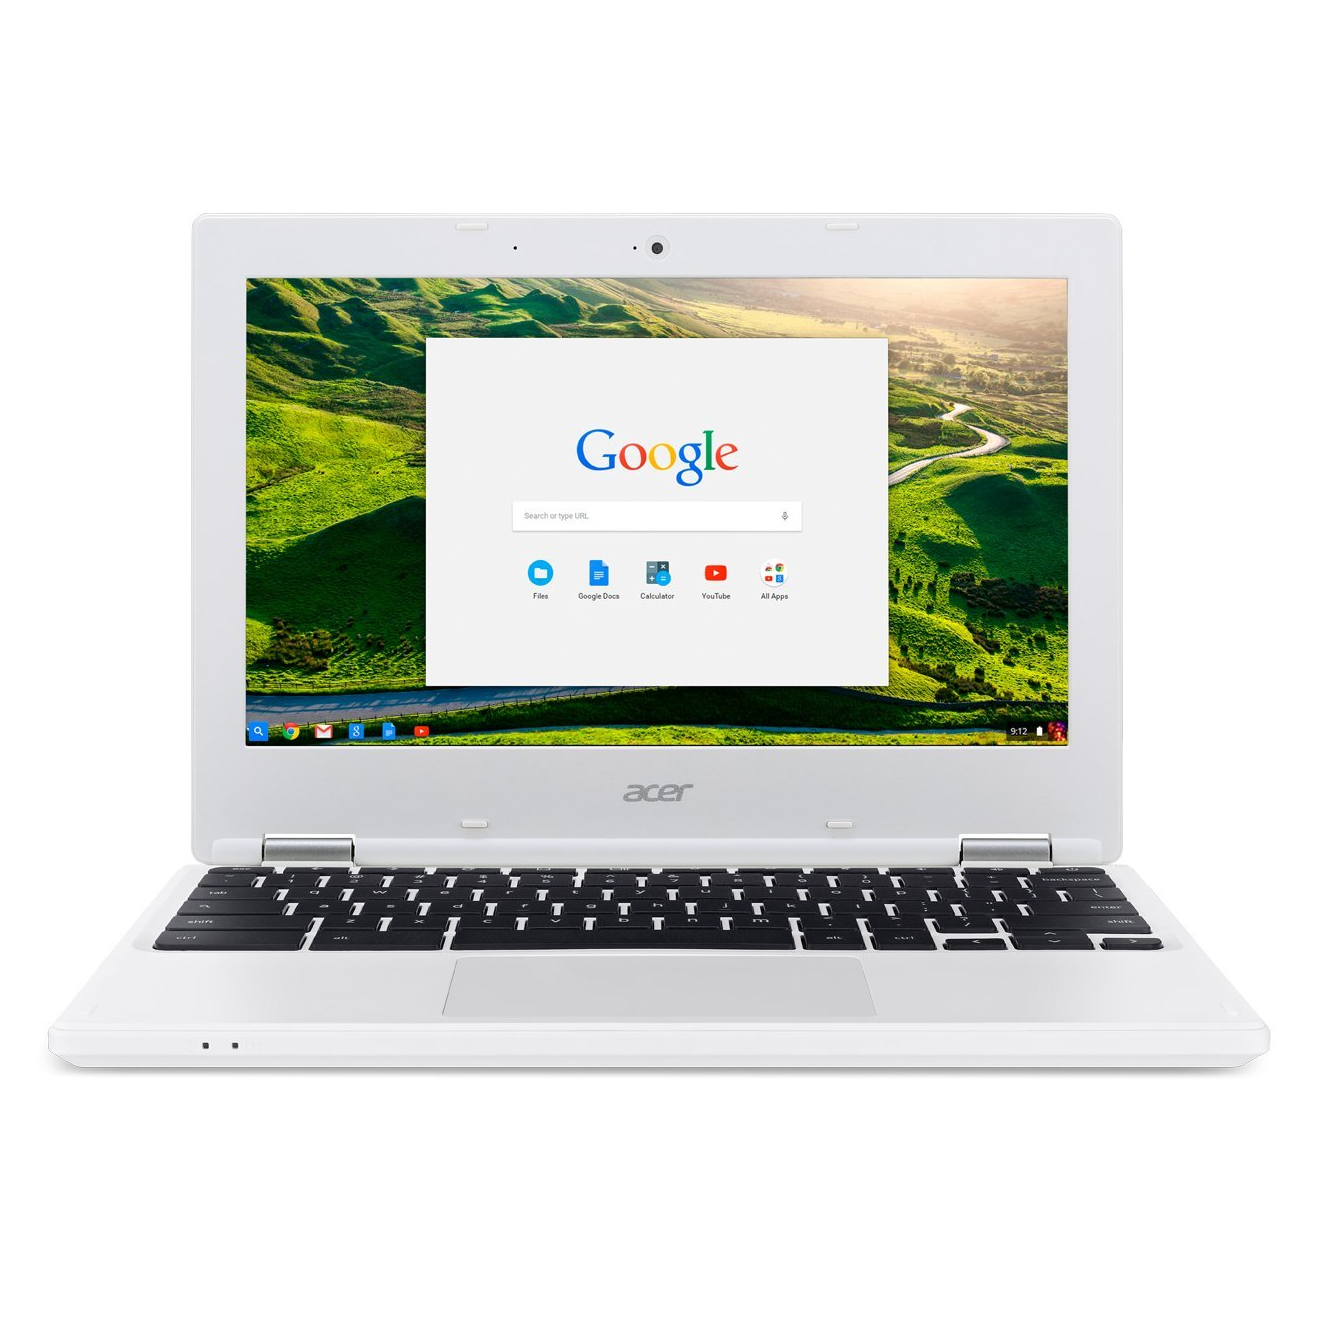 Prime Members: Acer Chromebook 11.6inch Laptop 2 GB RAM Only $129.99 Shipped!